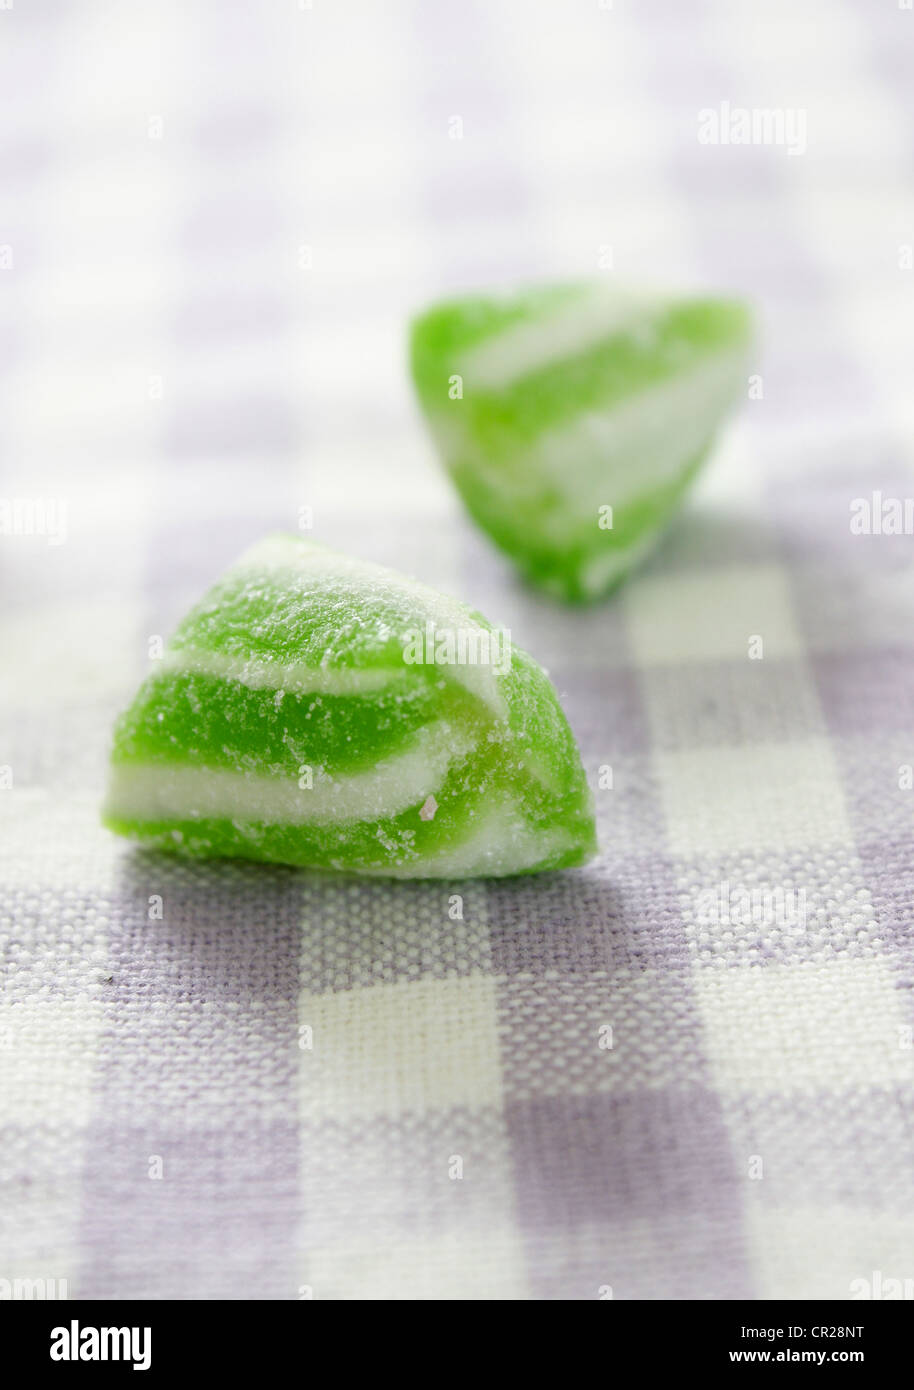 Boiled sweets Stock Photo